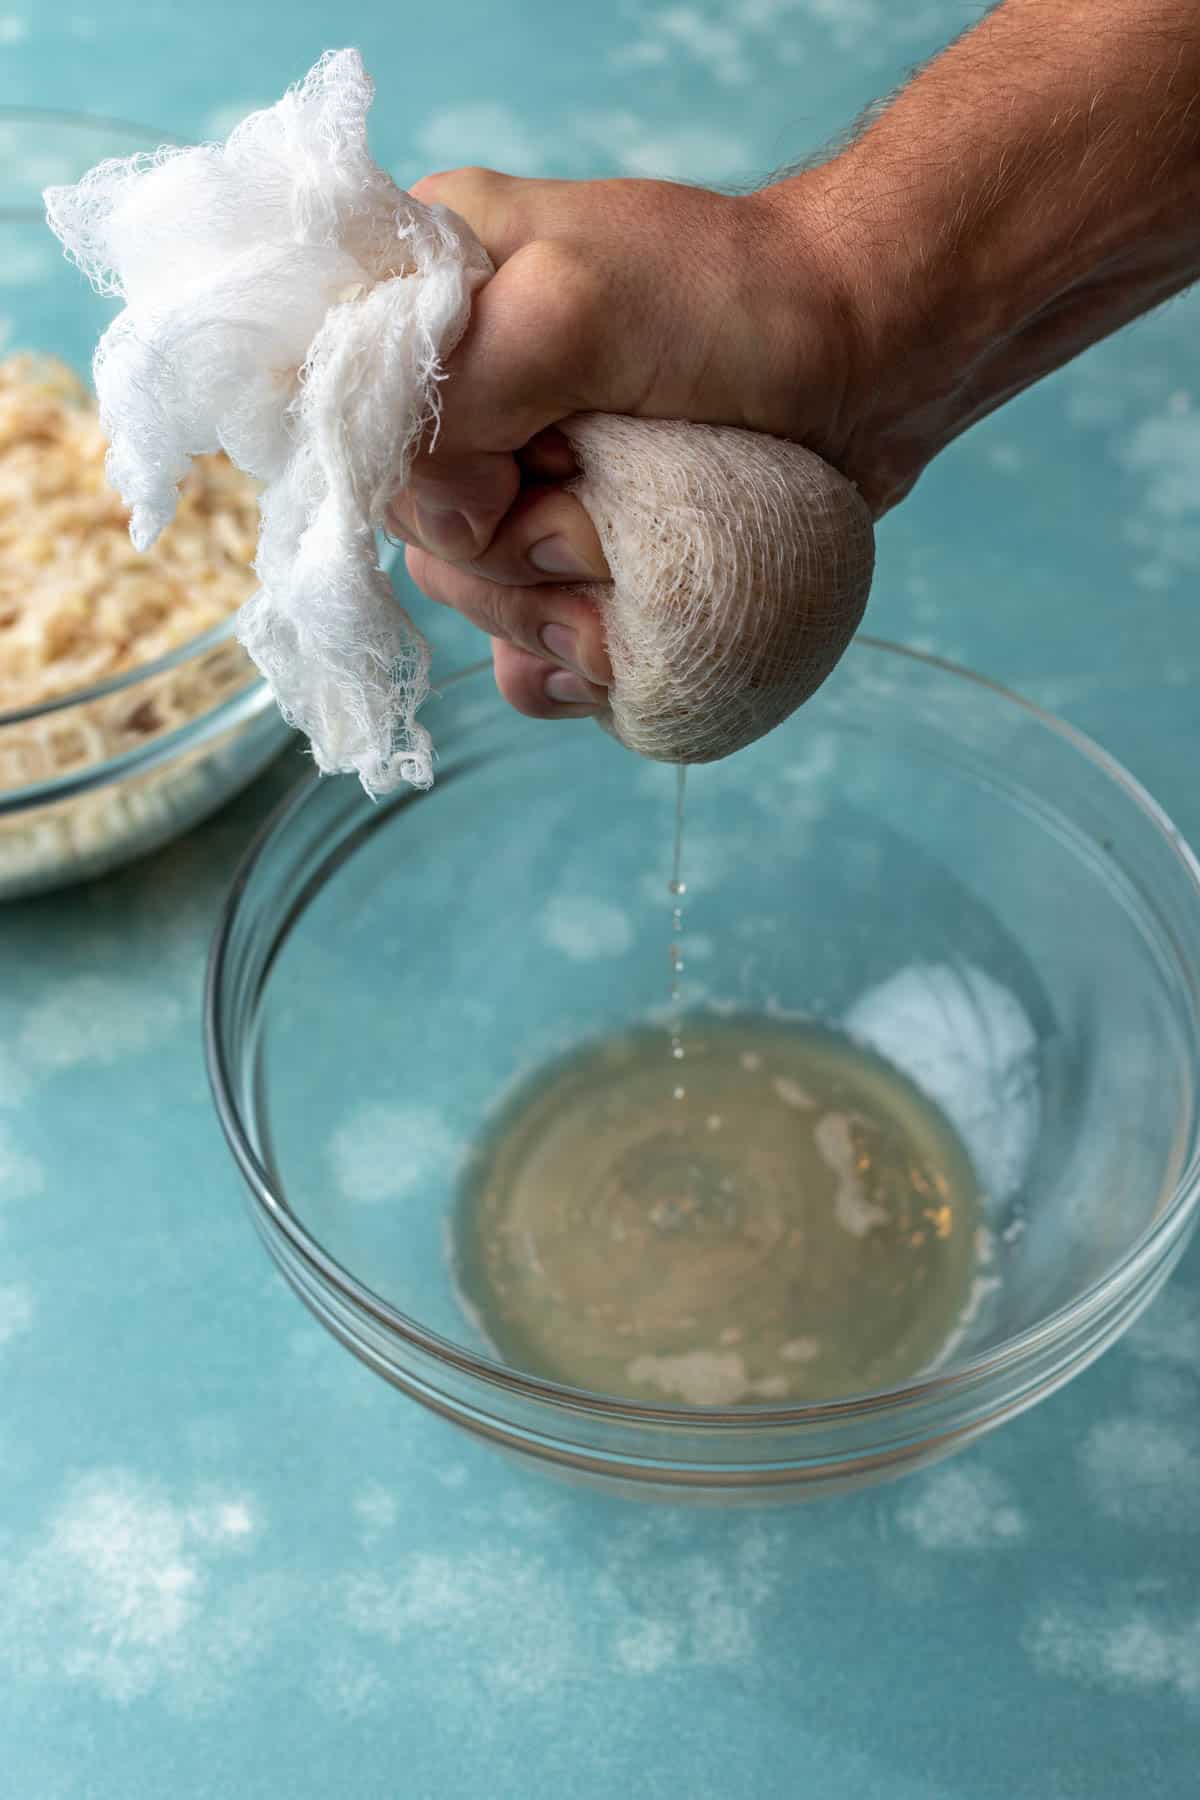 Shredded potatoes and onions in a cheesecloth with a hand squeezing extra water out.